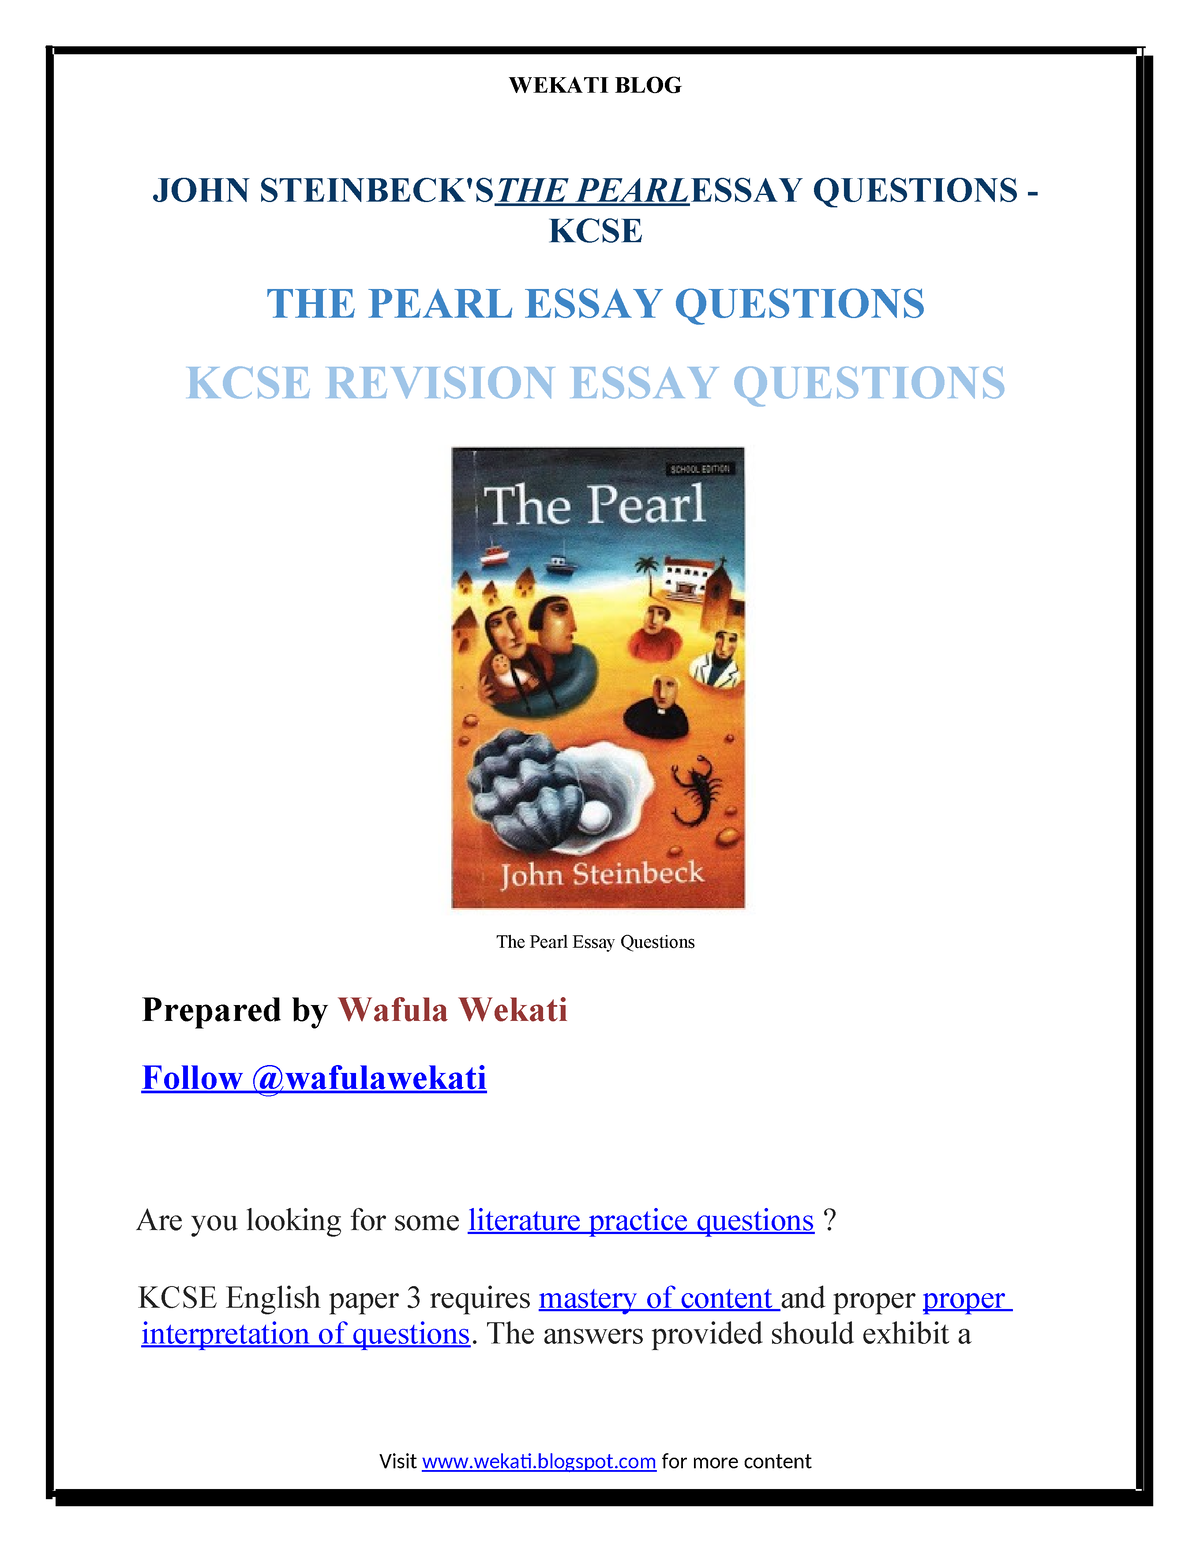 past kcse essay questions on the pearl